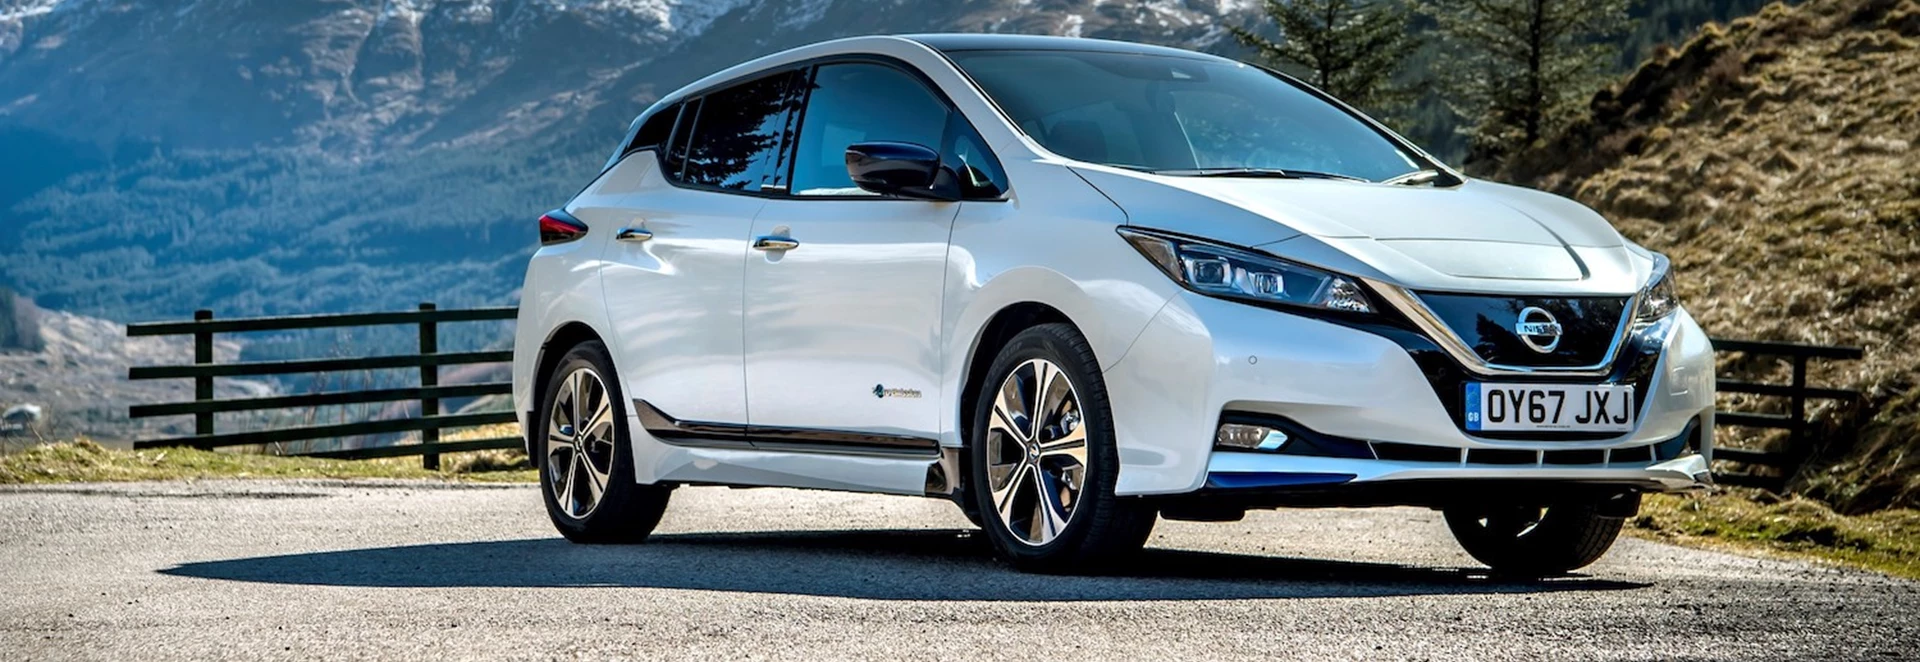 Why is the Nissan Leaf Europe's most popular EV?